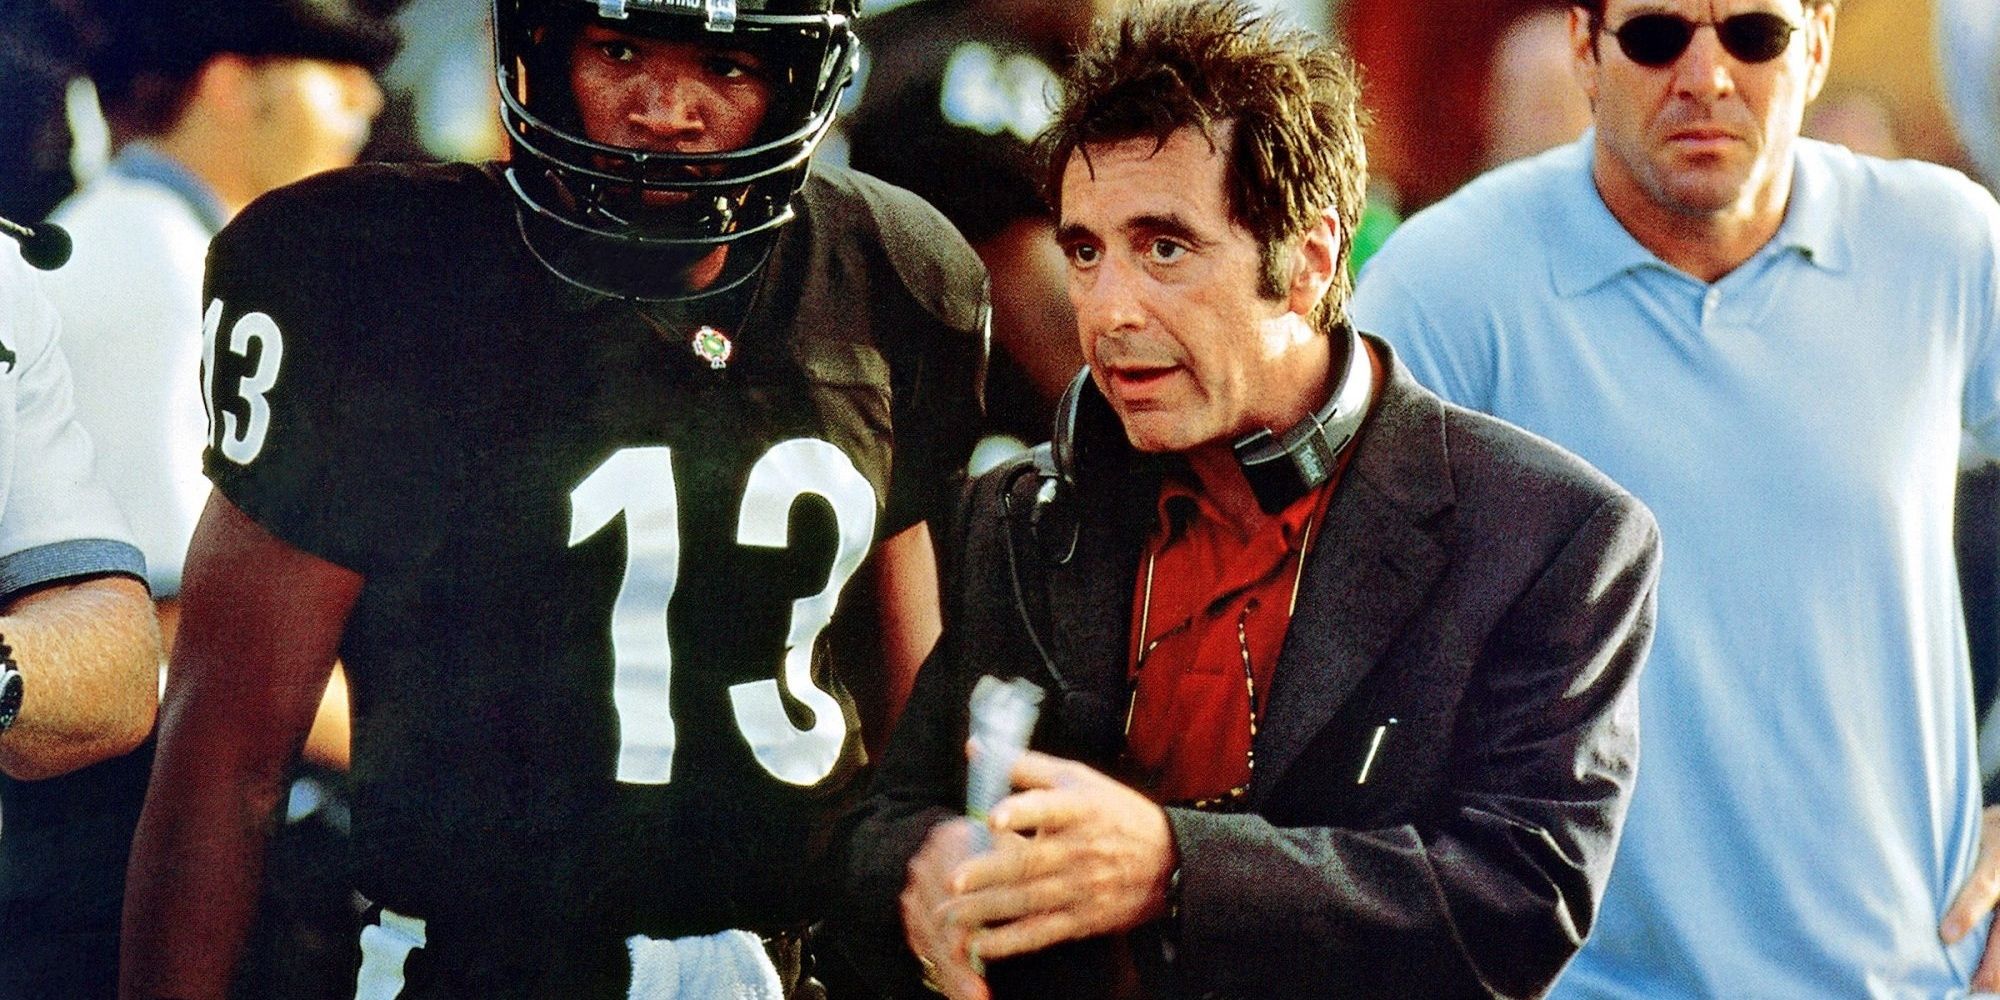 Al Pacino as coach talking with football player in Any Given Sunday